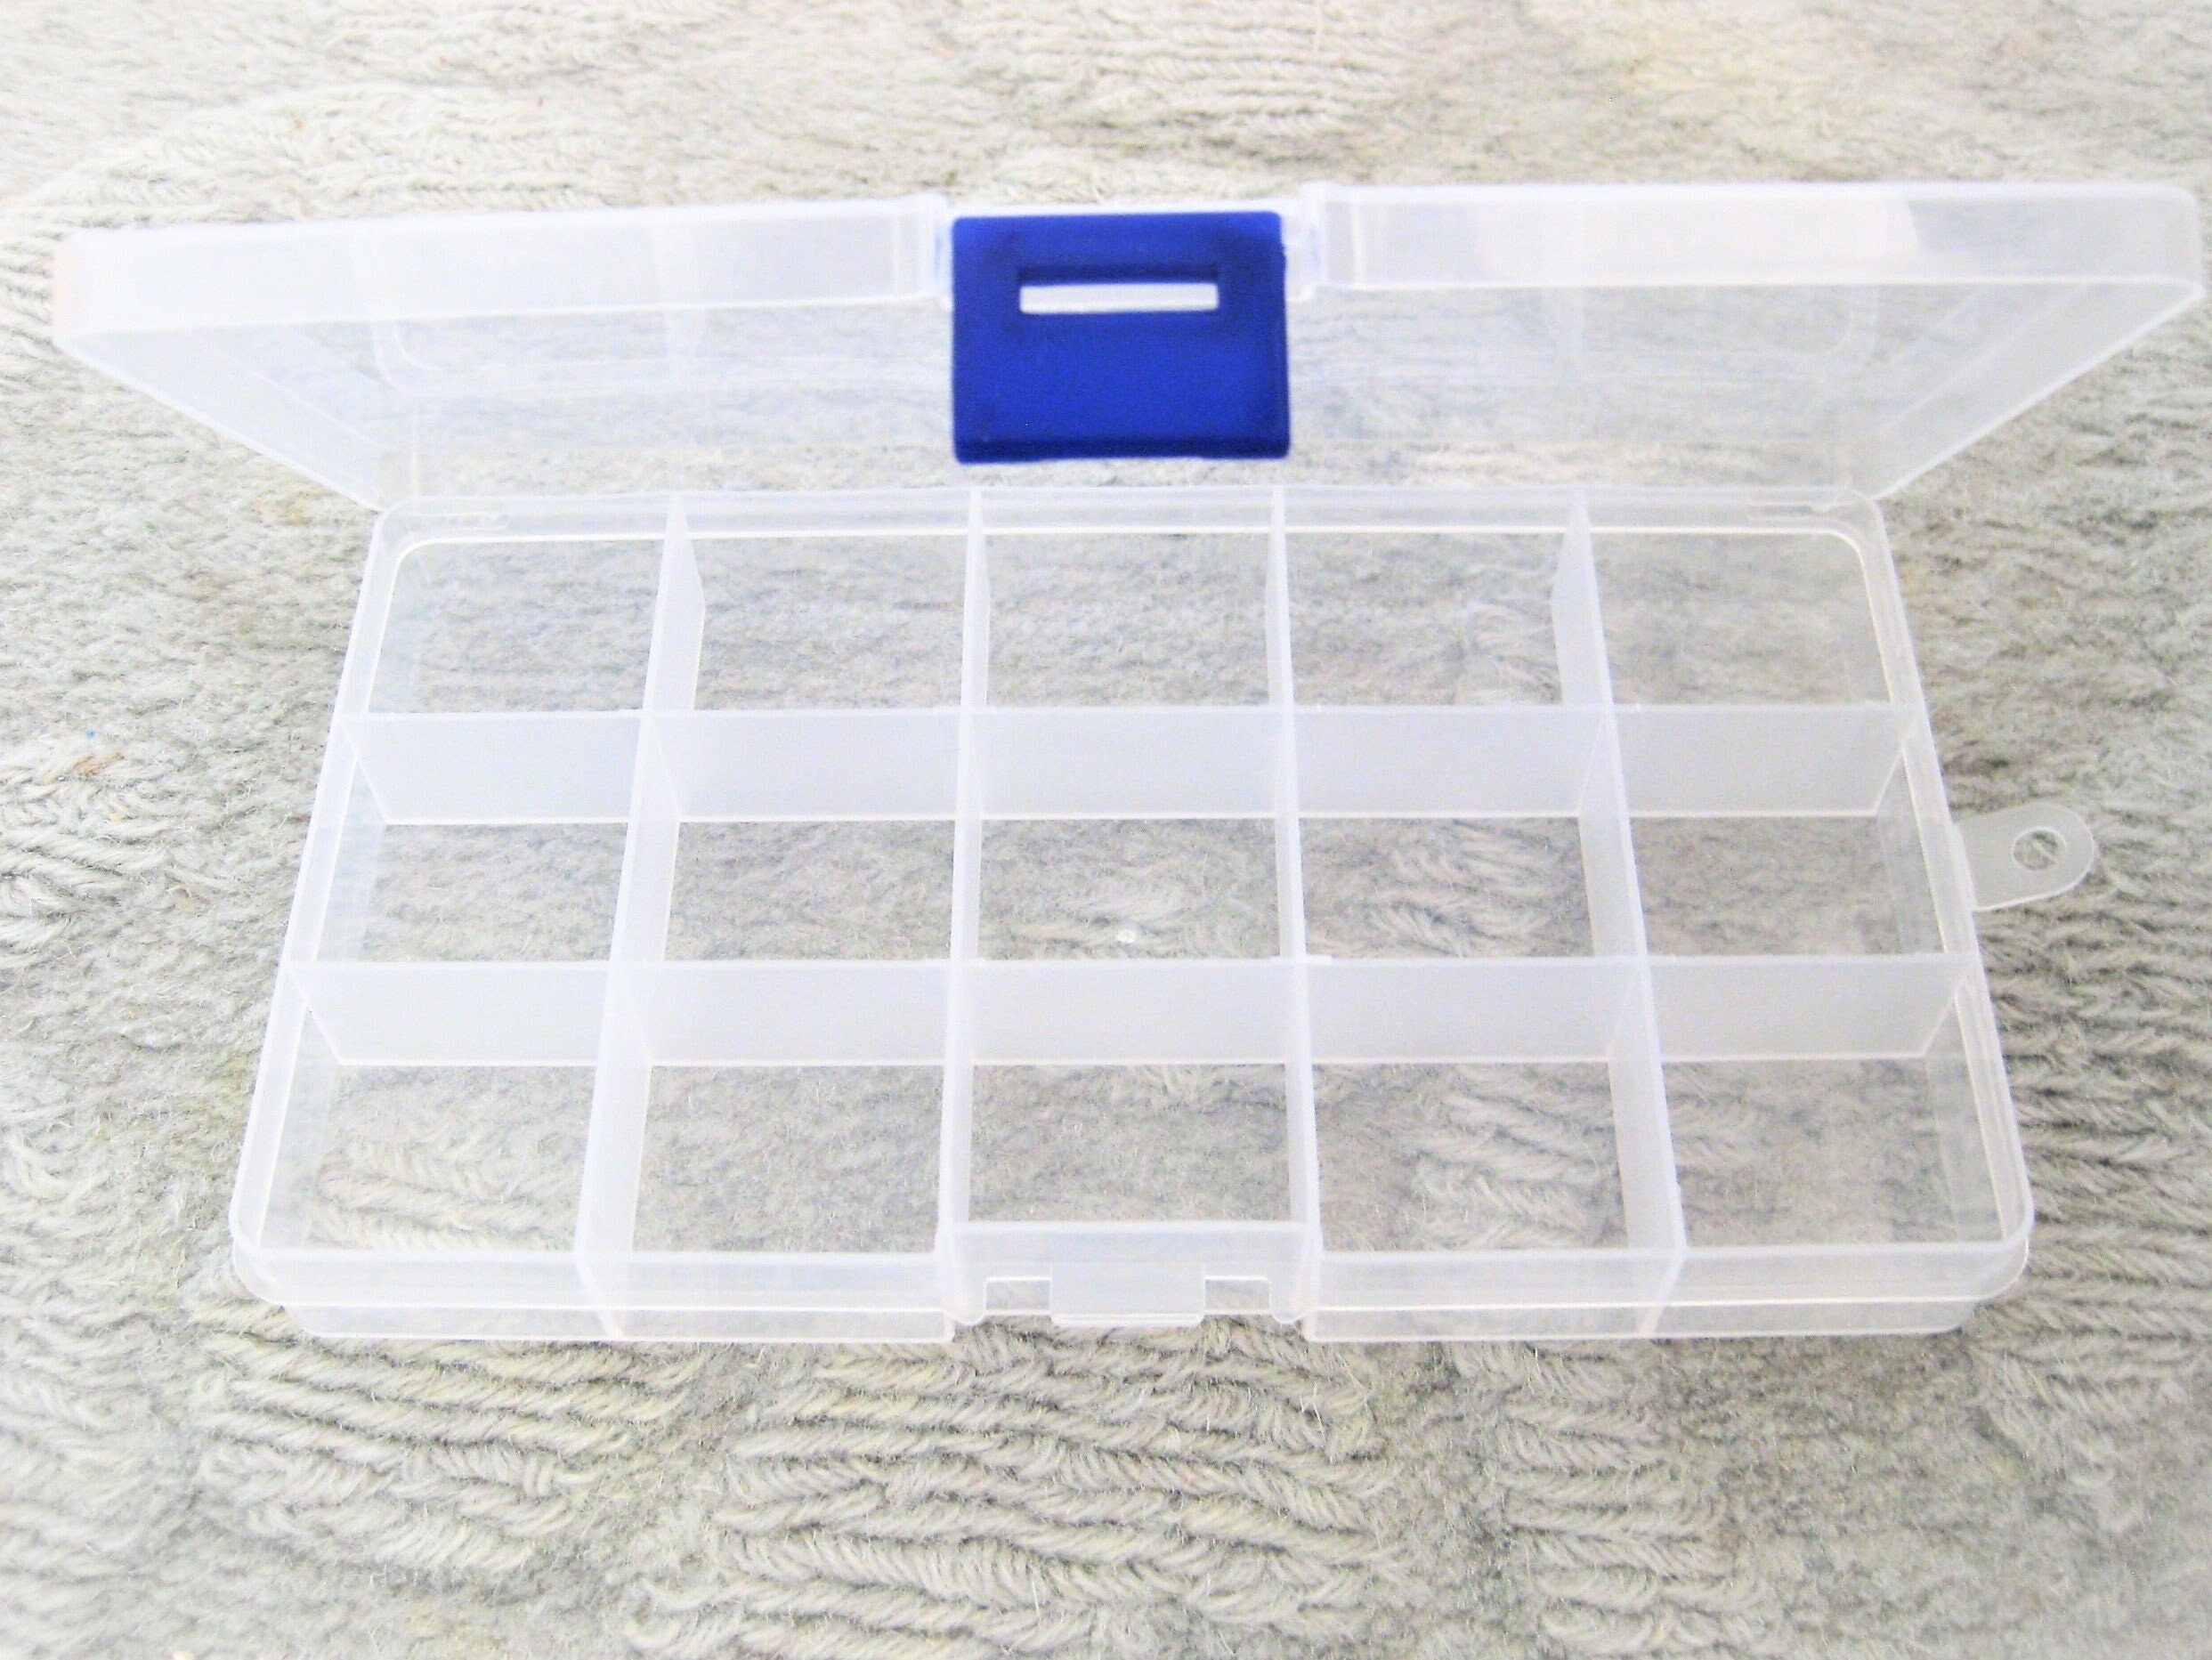 Keeper Box, Large 20 Compartment Bead Storage Box with Latching